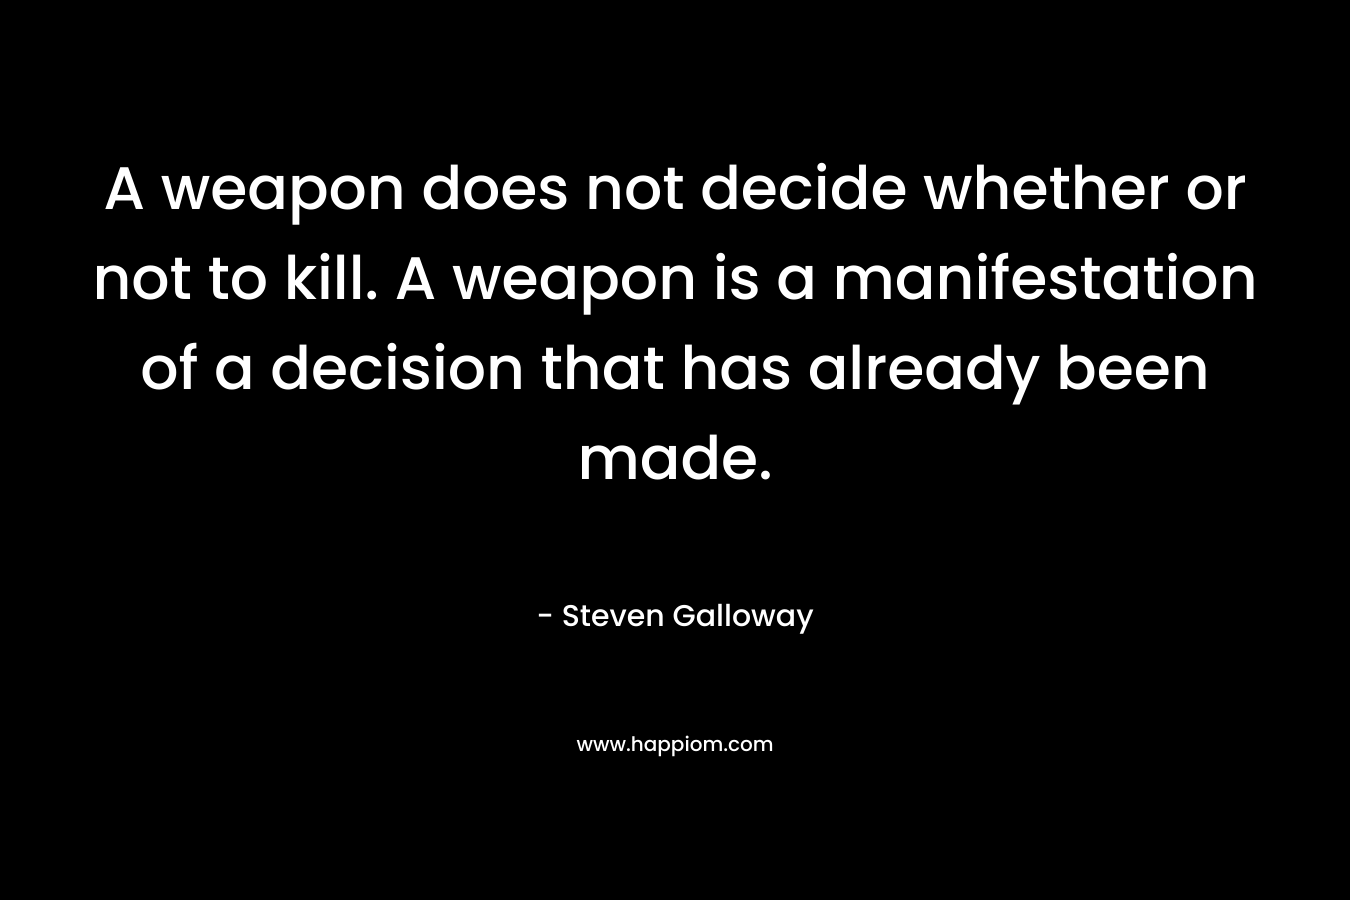 A weapon does not decide whether or not to kill. A weapon is a manifestation of a decision that has already been made. – Steven Galloway